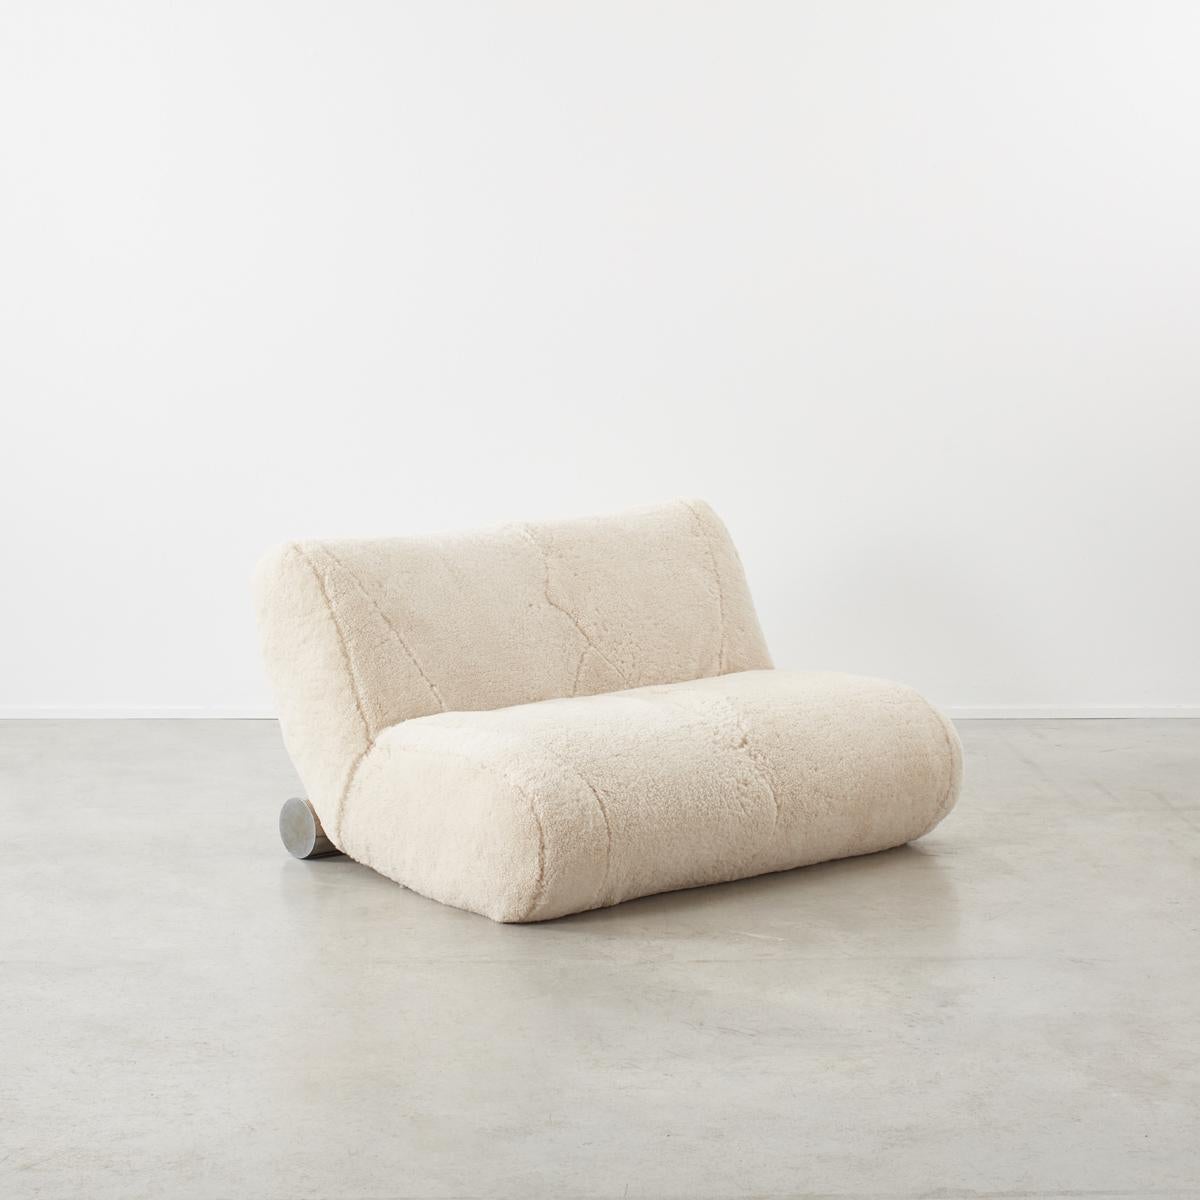 This minimal seventies loveseat has a simple curved side profile accented with a chromed cylinder base piece. This sofa is very soft and squishy offering the user an extremely comfortable seating experience. The sofa has been recently reupholstered